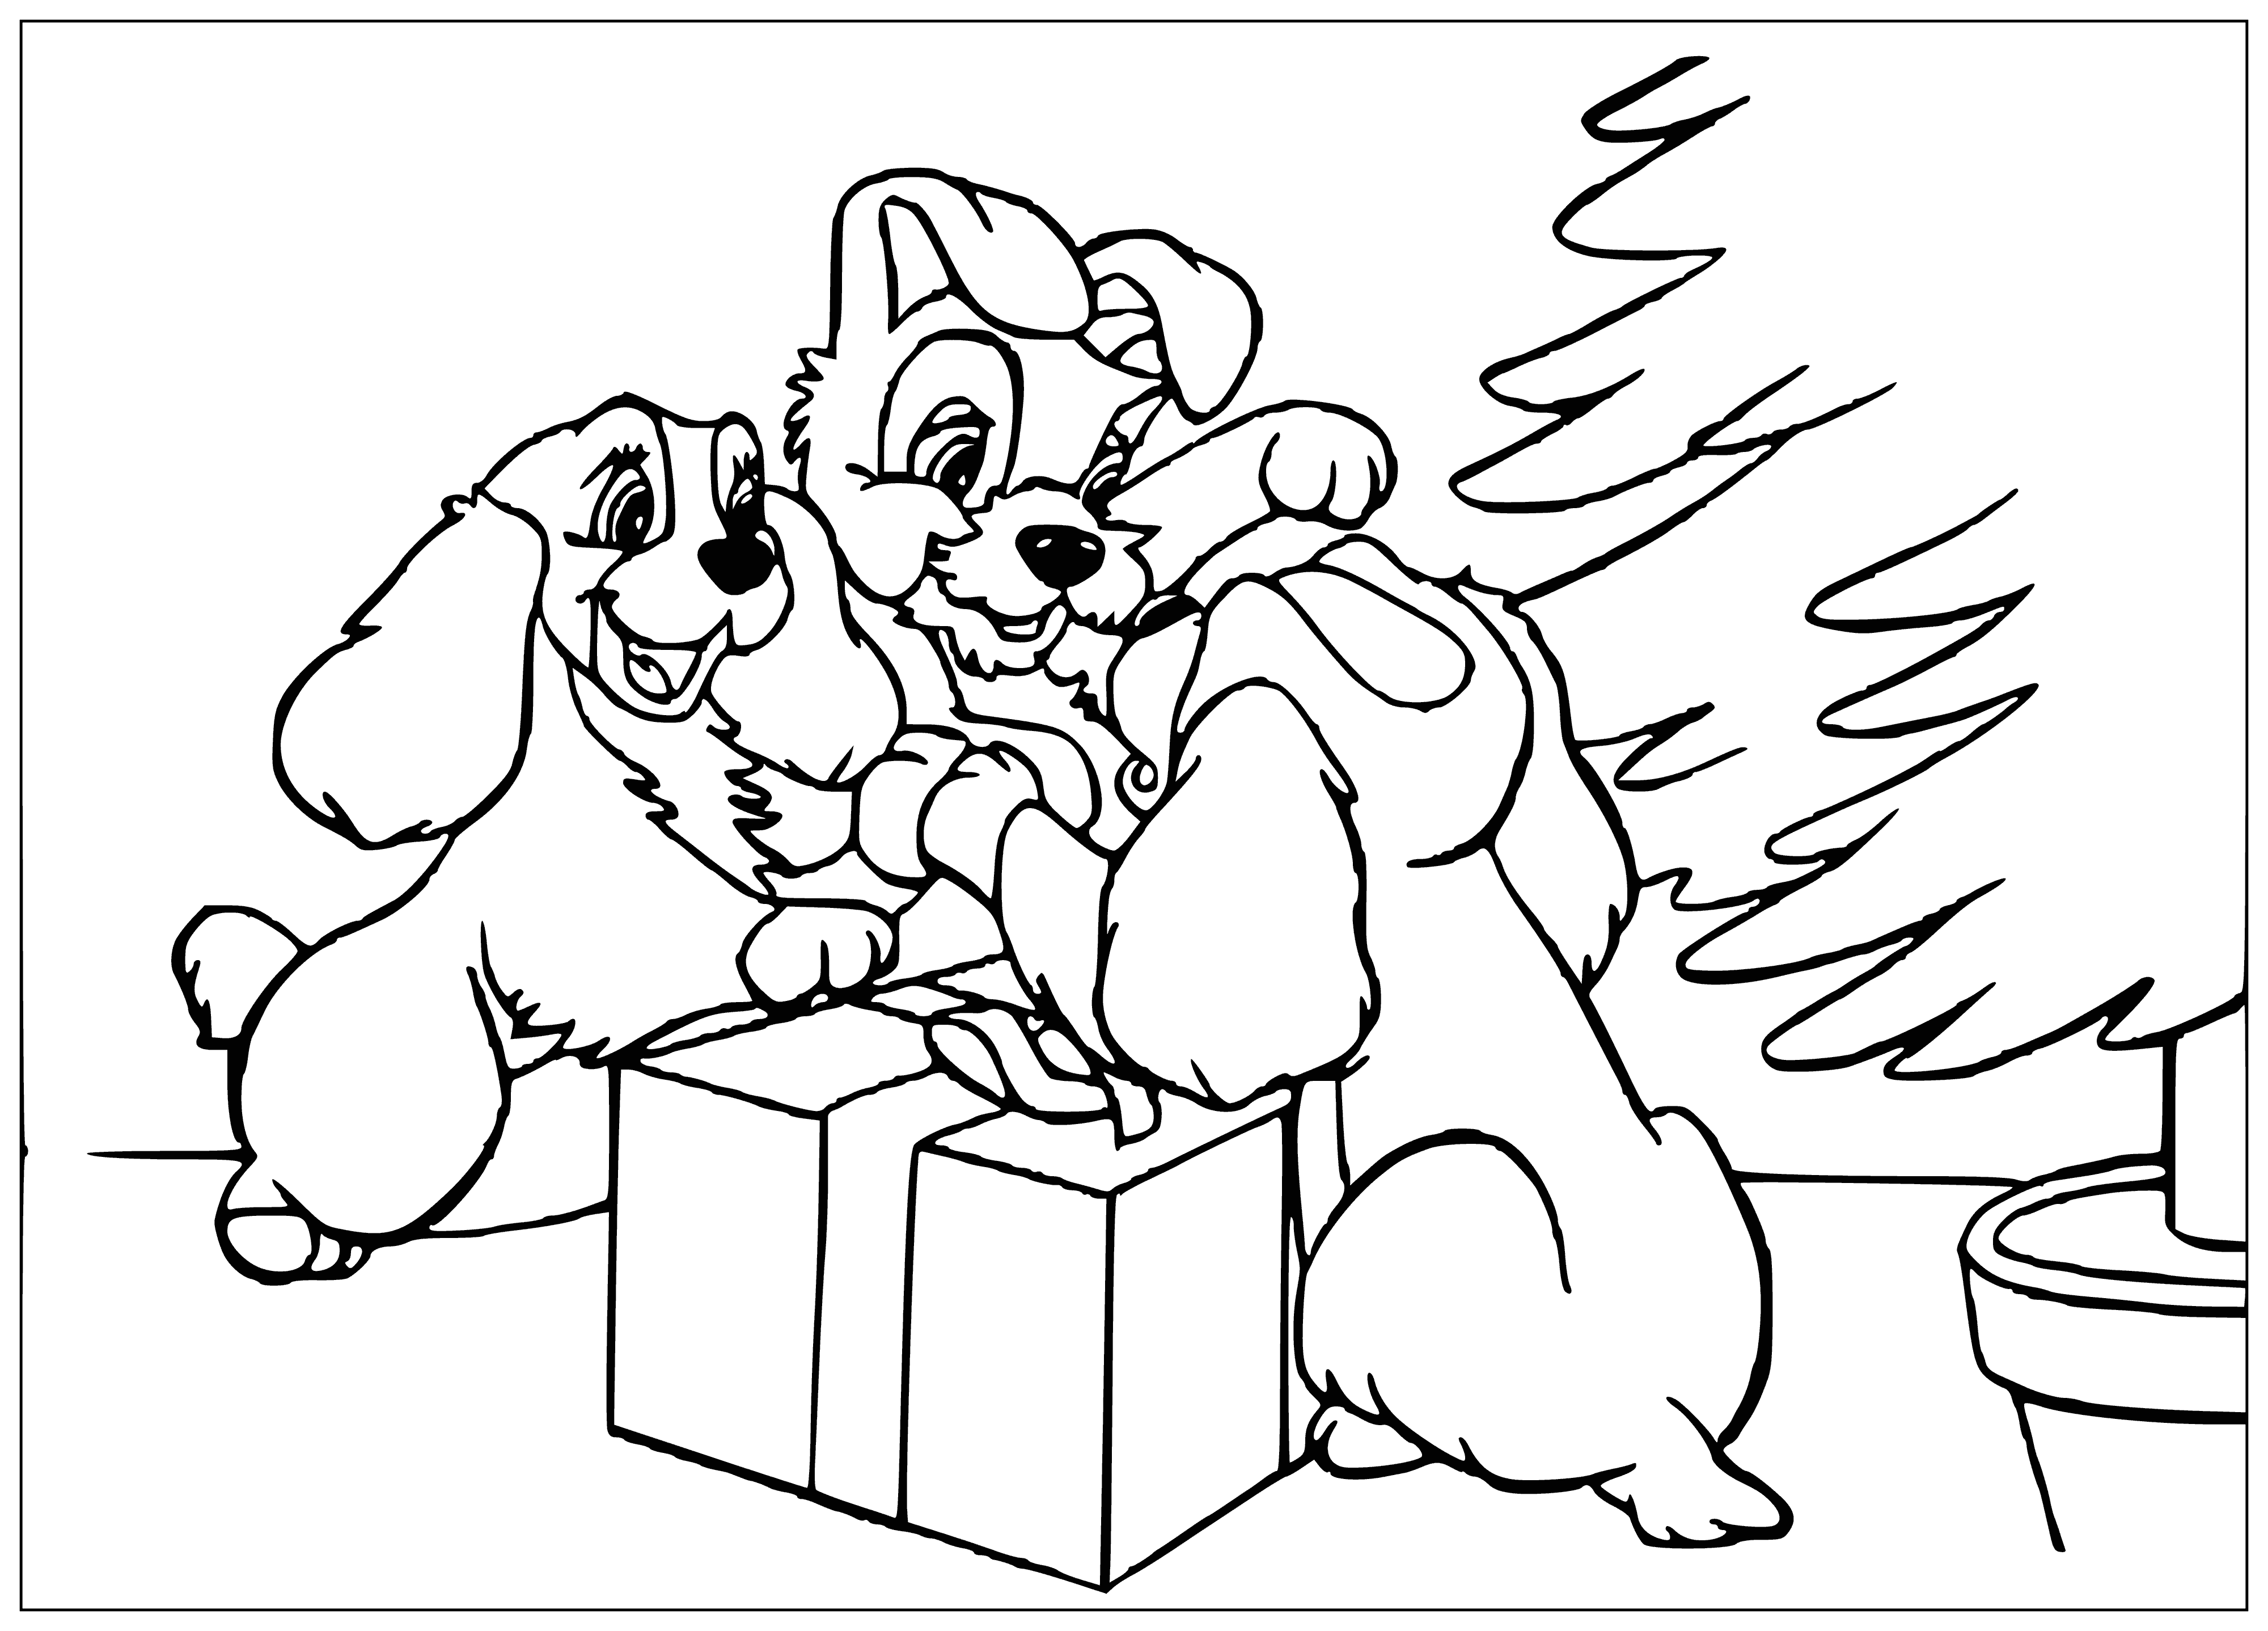 A gift under the tree coloring page